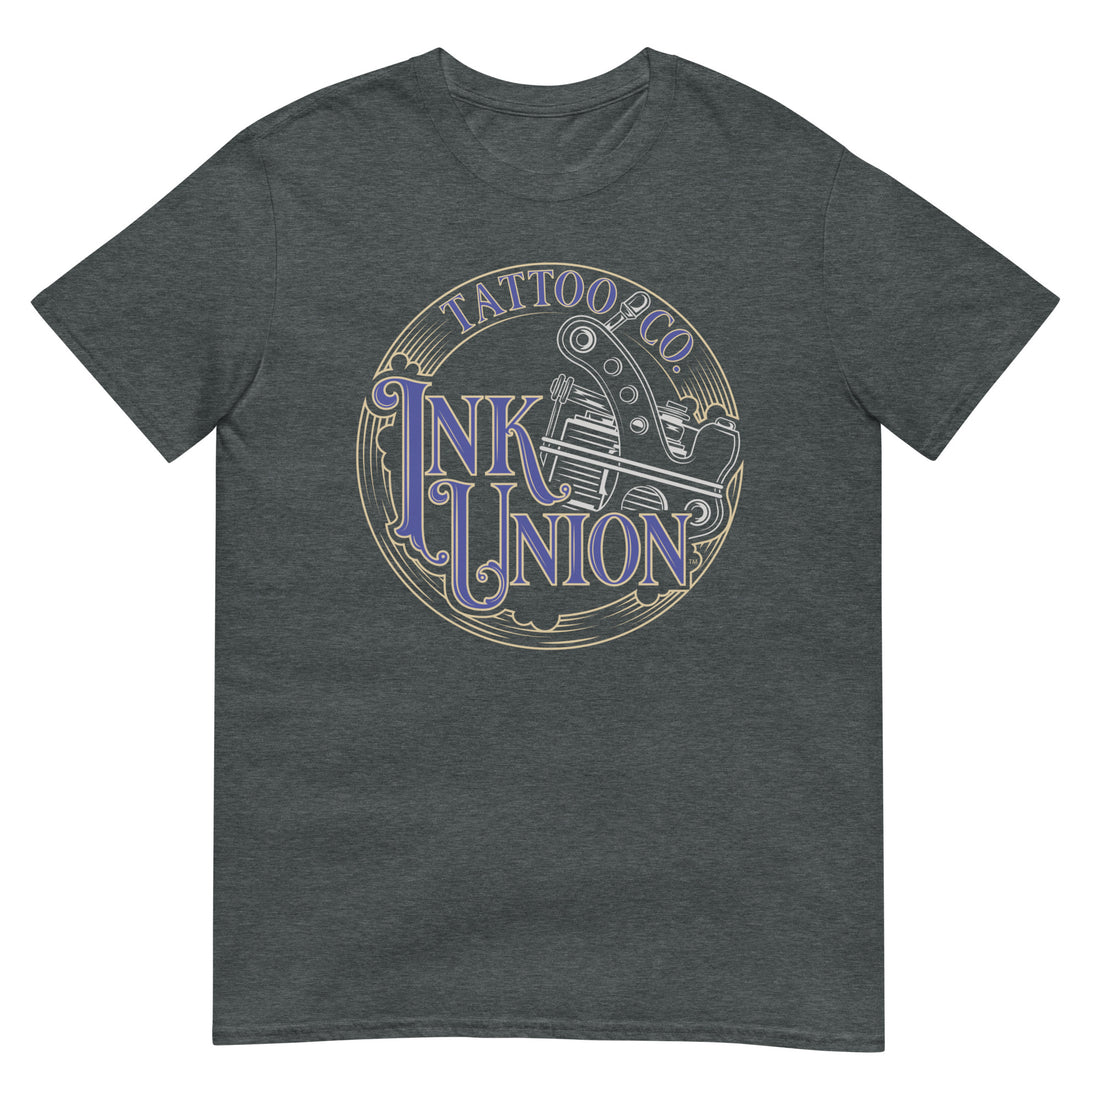 A dark grey t-shirt adorned with the Ink Union Tattoo Co. blue and gold with a silver tattoo machine logo.